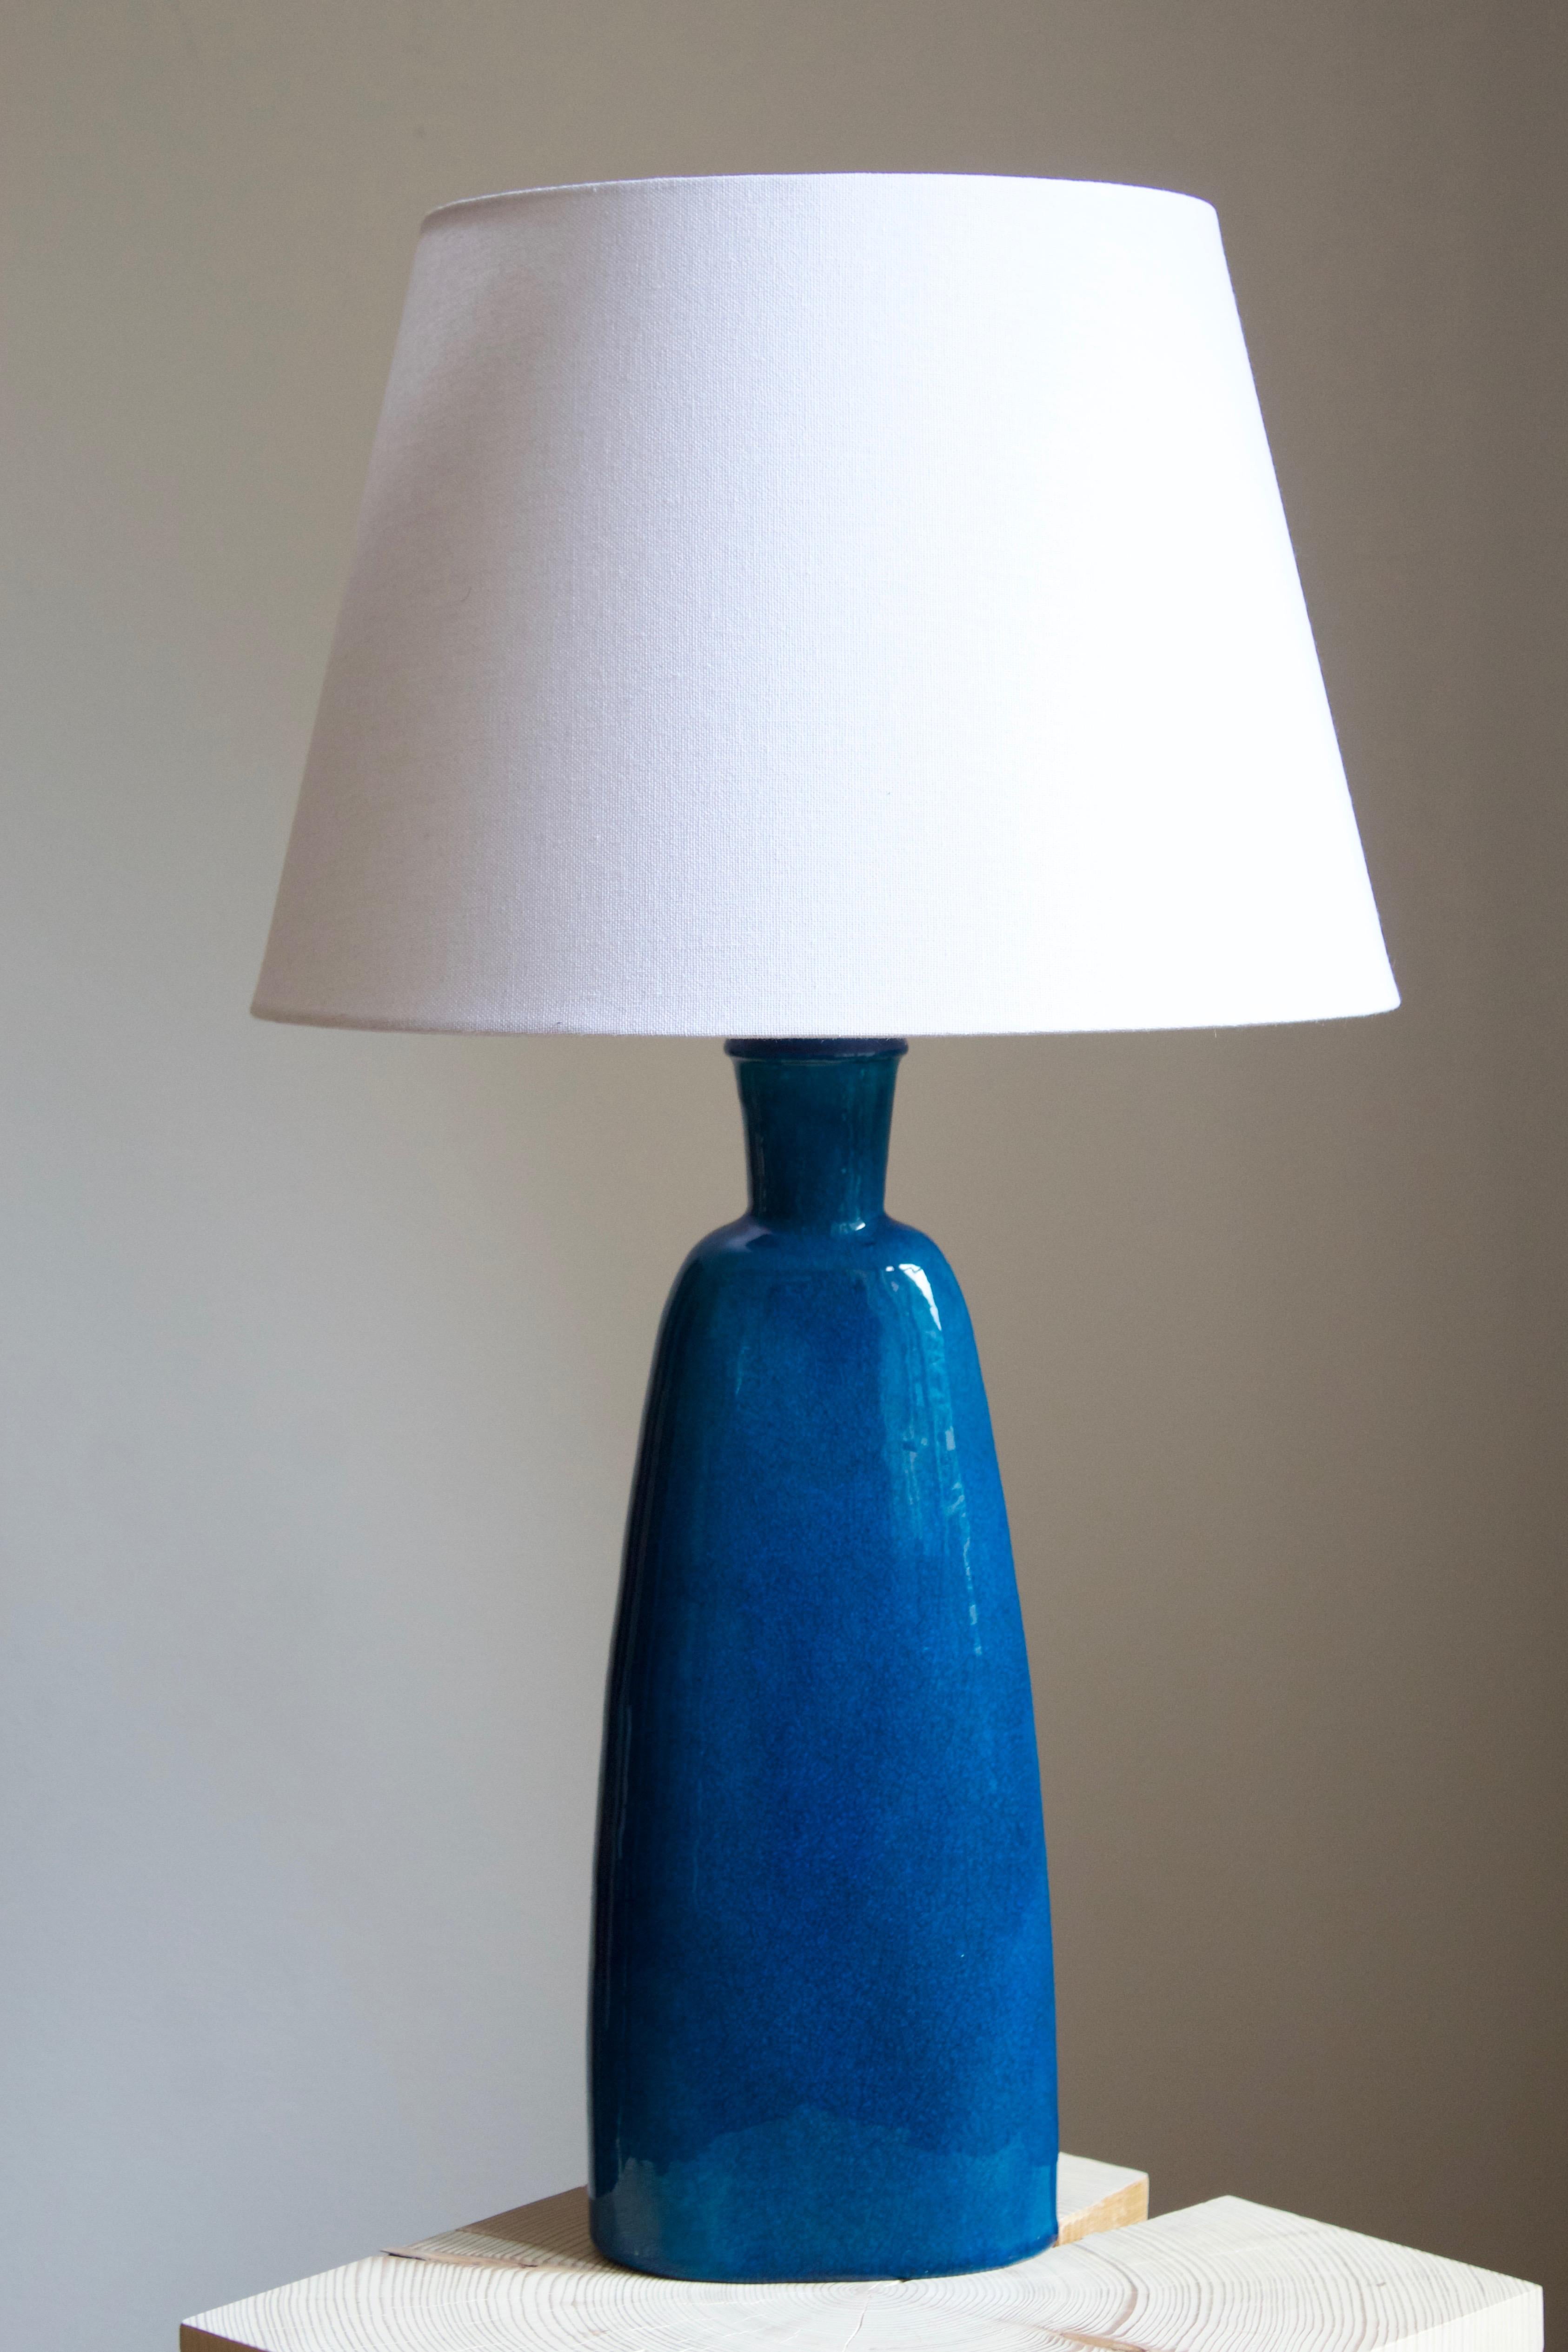 A large table lamp, designed and produced by Kähler, Denmark, c. 1930s. Labeled and marked.
  
Stated dimensions exclude lampshade. Height includes socket. Sold without lampshade.